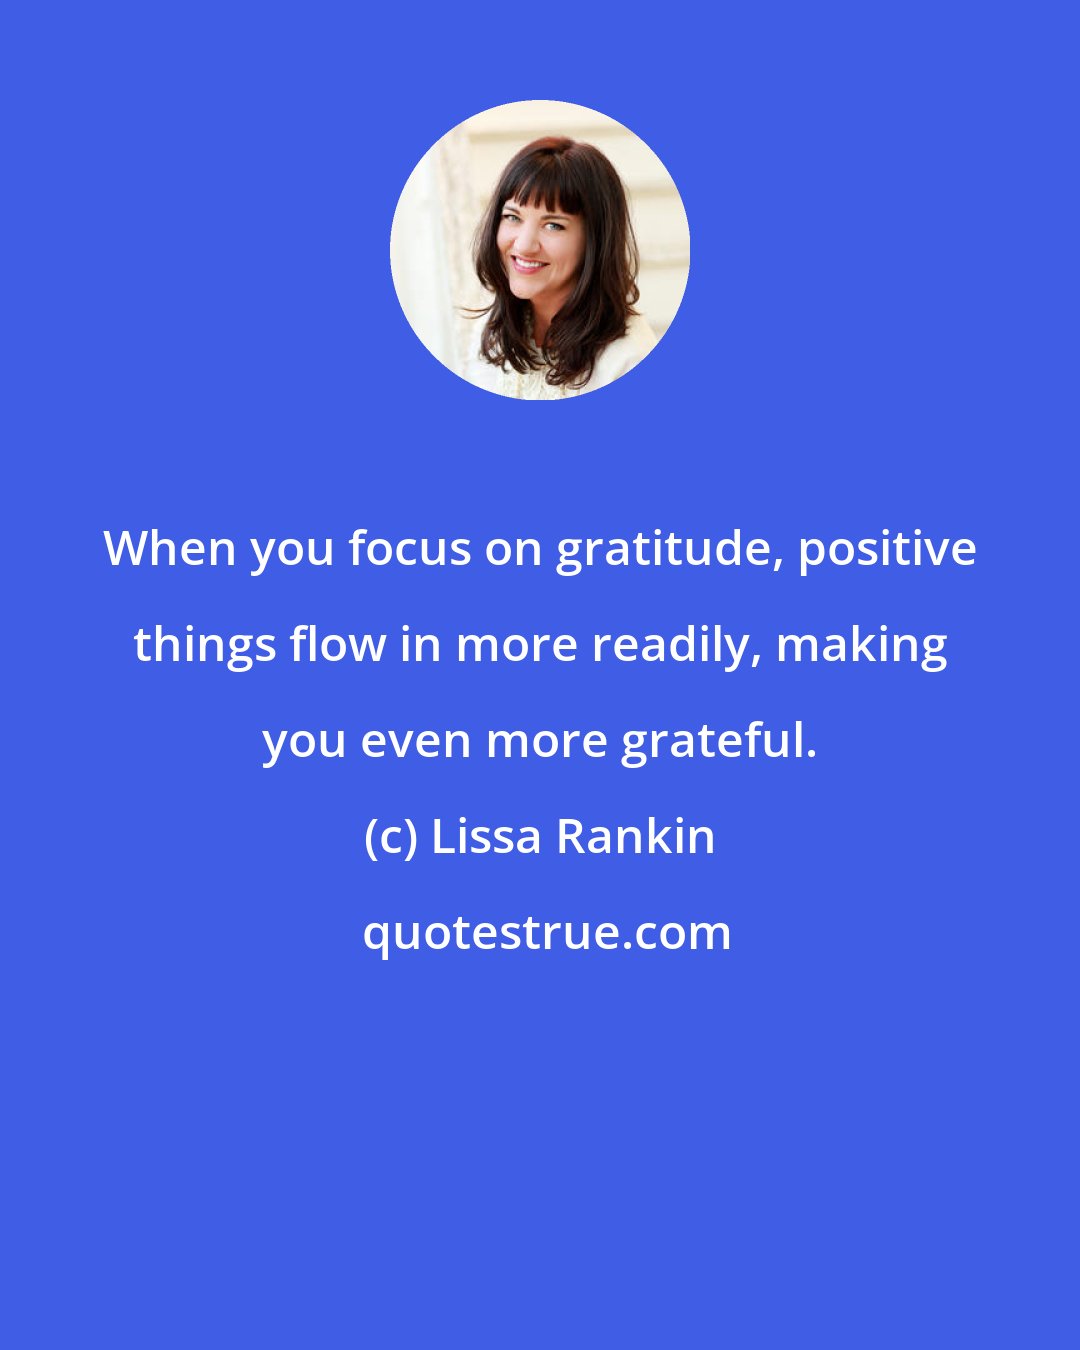 Lissa Rankin: When you focus on gratitude, positive things flow in more readily, making you even more grateful.